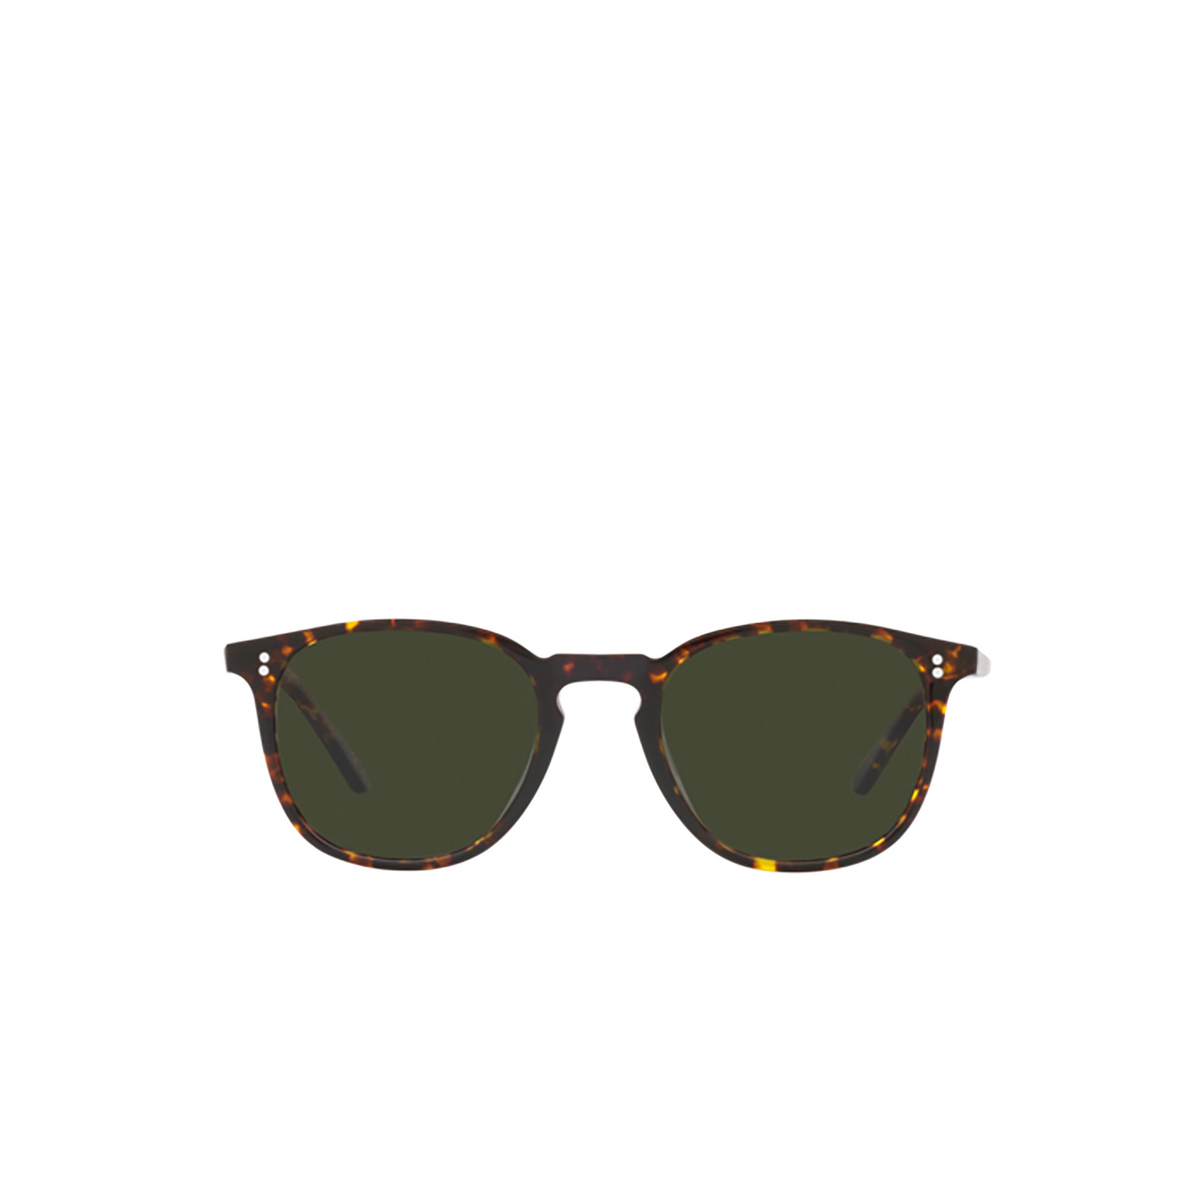 Oliver Peoples FINLEY 1993 Sunglasses 1741P1 Atago Tortoise - front view